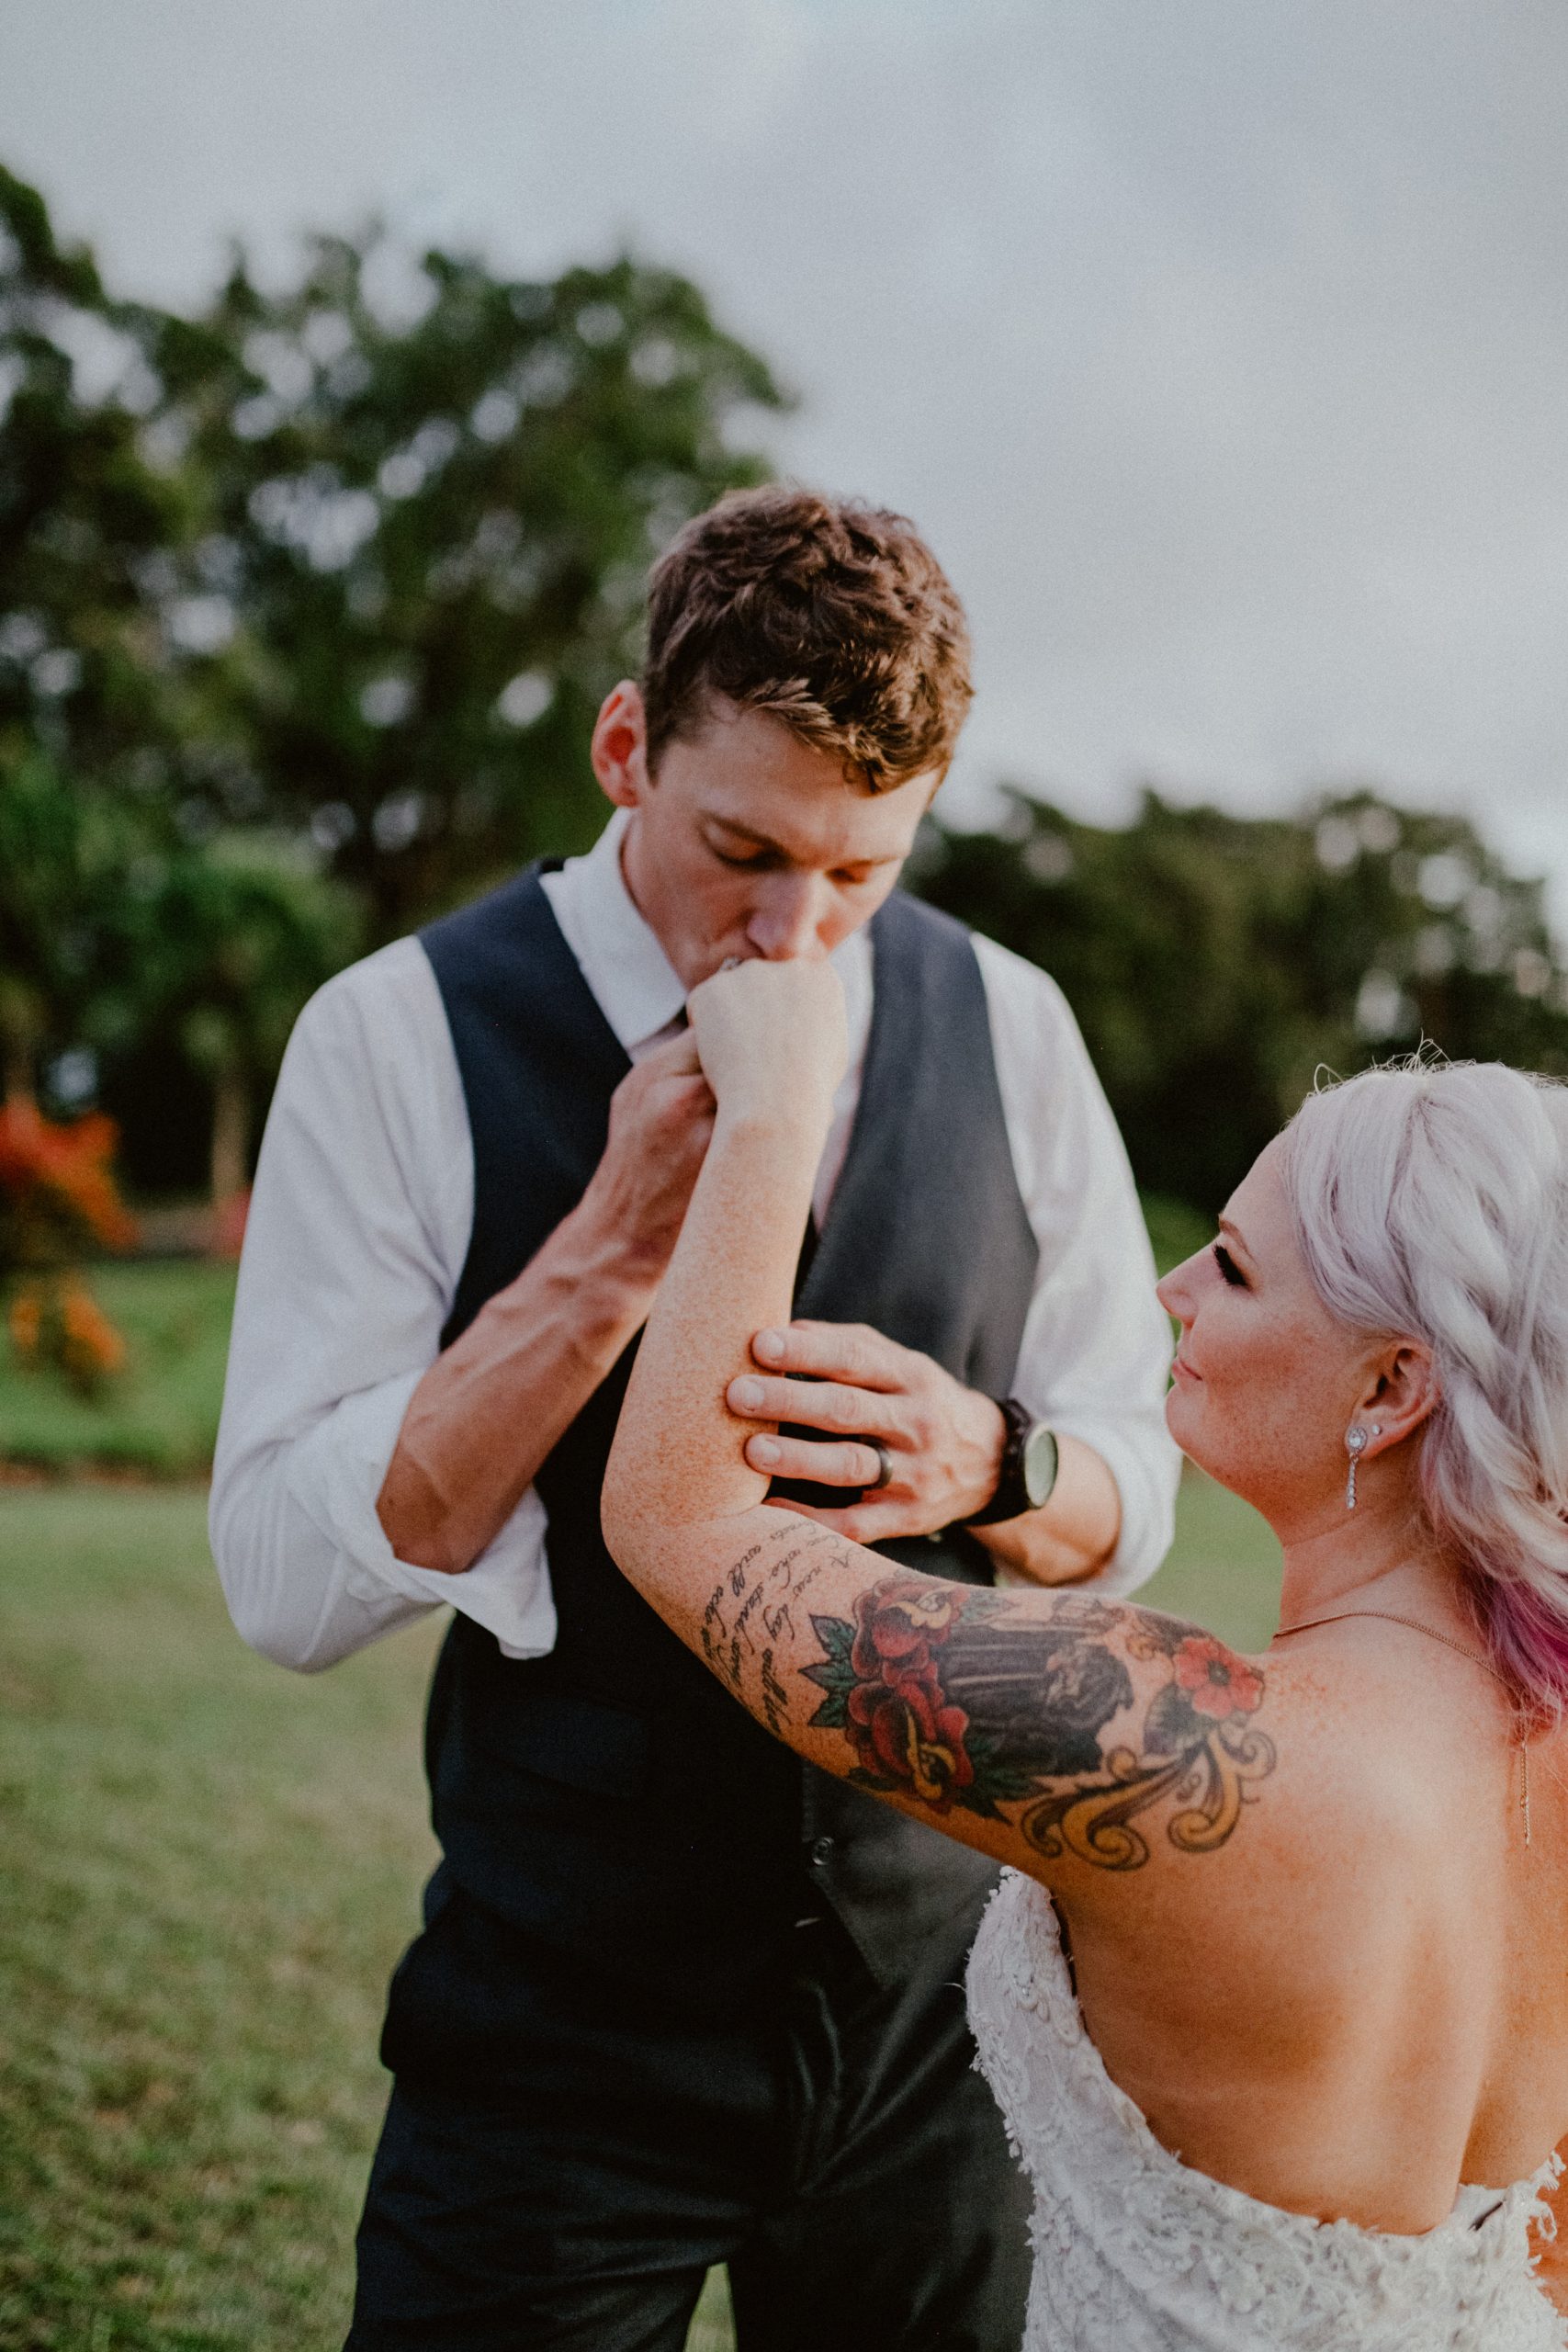 Groom kisses tattooed bride's hand after sliding on wedding band during ceremony at Sunset Ranch Oahu | Oahu Wedding Photographer, Oahu Elopement Photographer, Destination Wedding Photographer, Destination Elopement Photographer, Newlywed moments ideas, Newlywed Photography inspiration, Hawaii Elopement ideas | chelseaabril.com